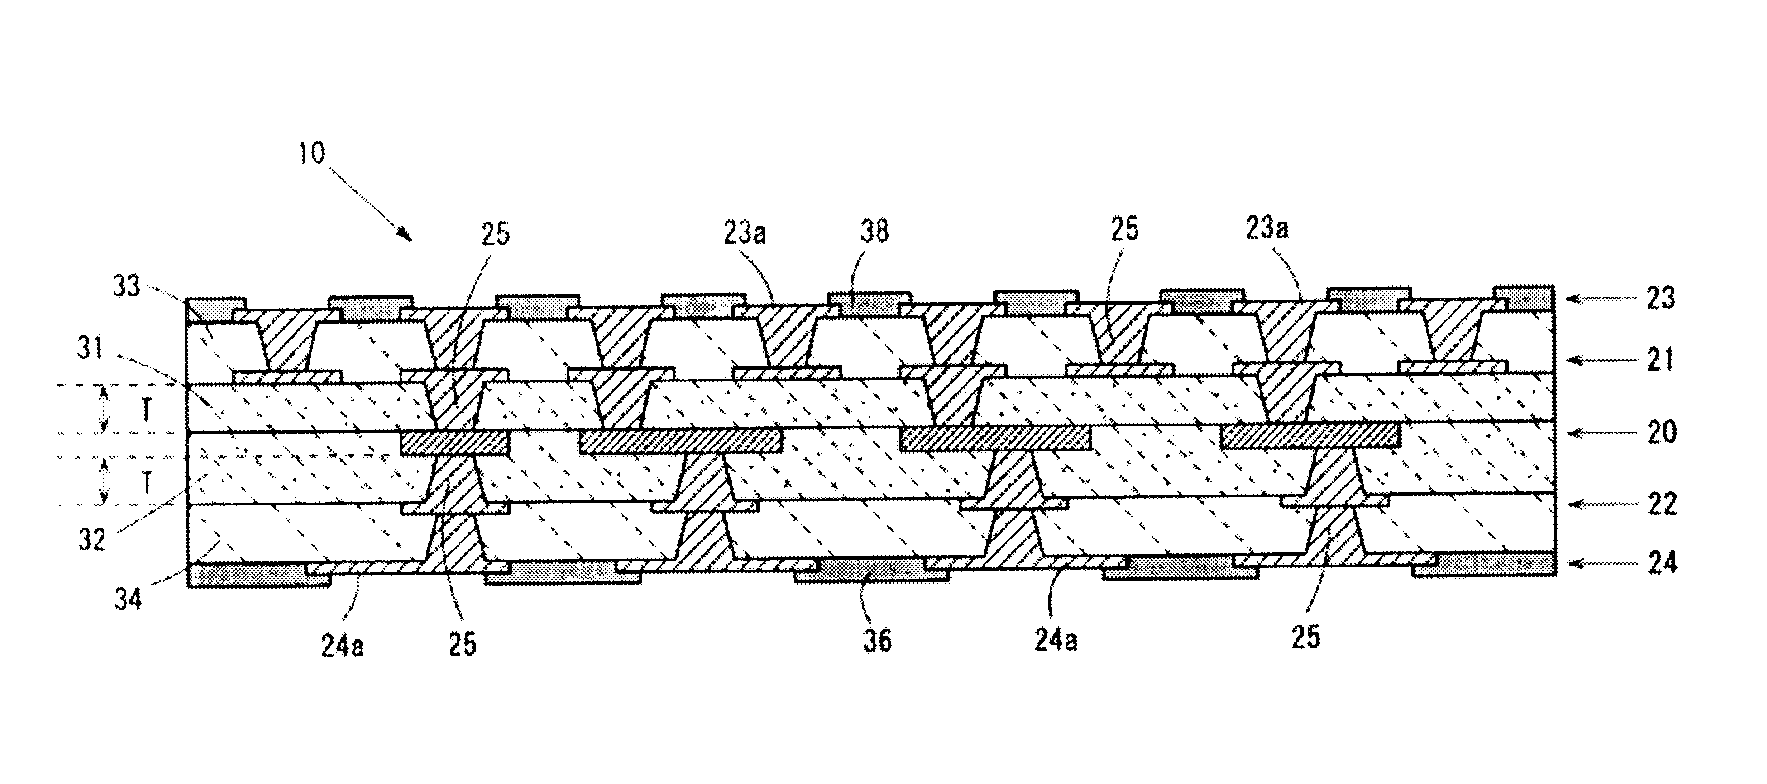 Multilayer wiring substrate